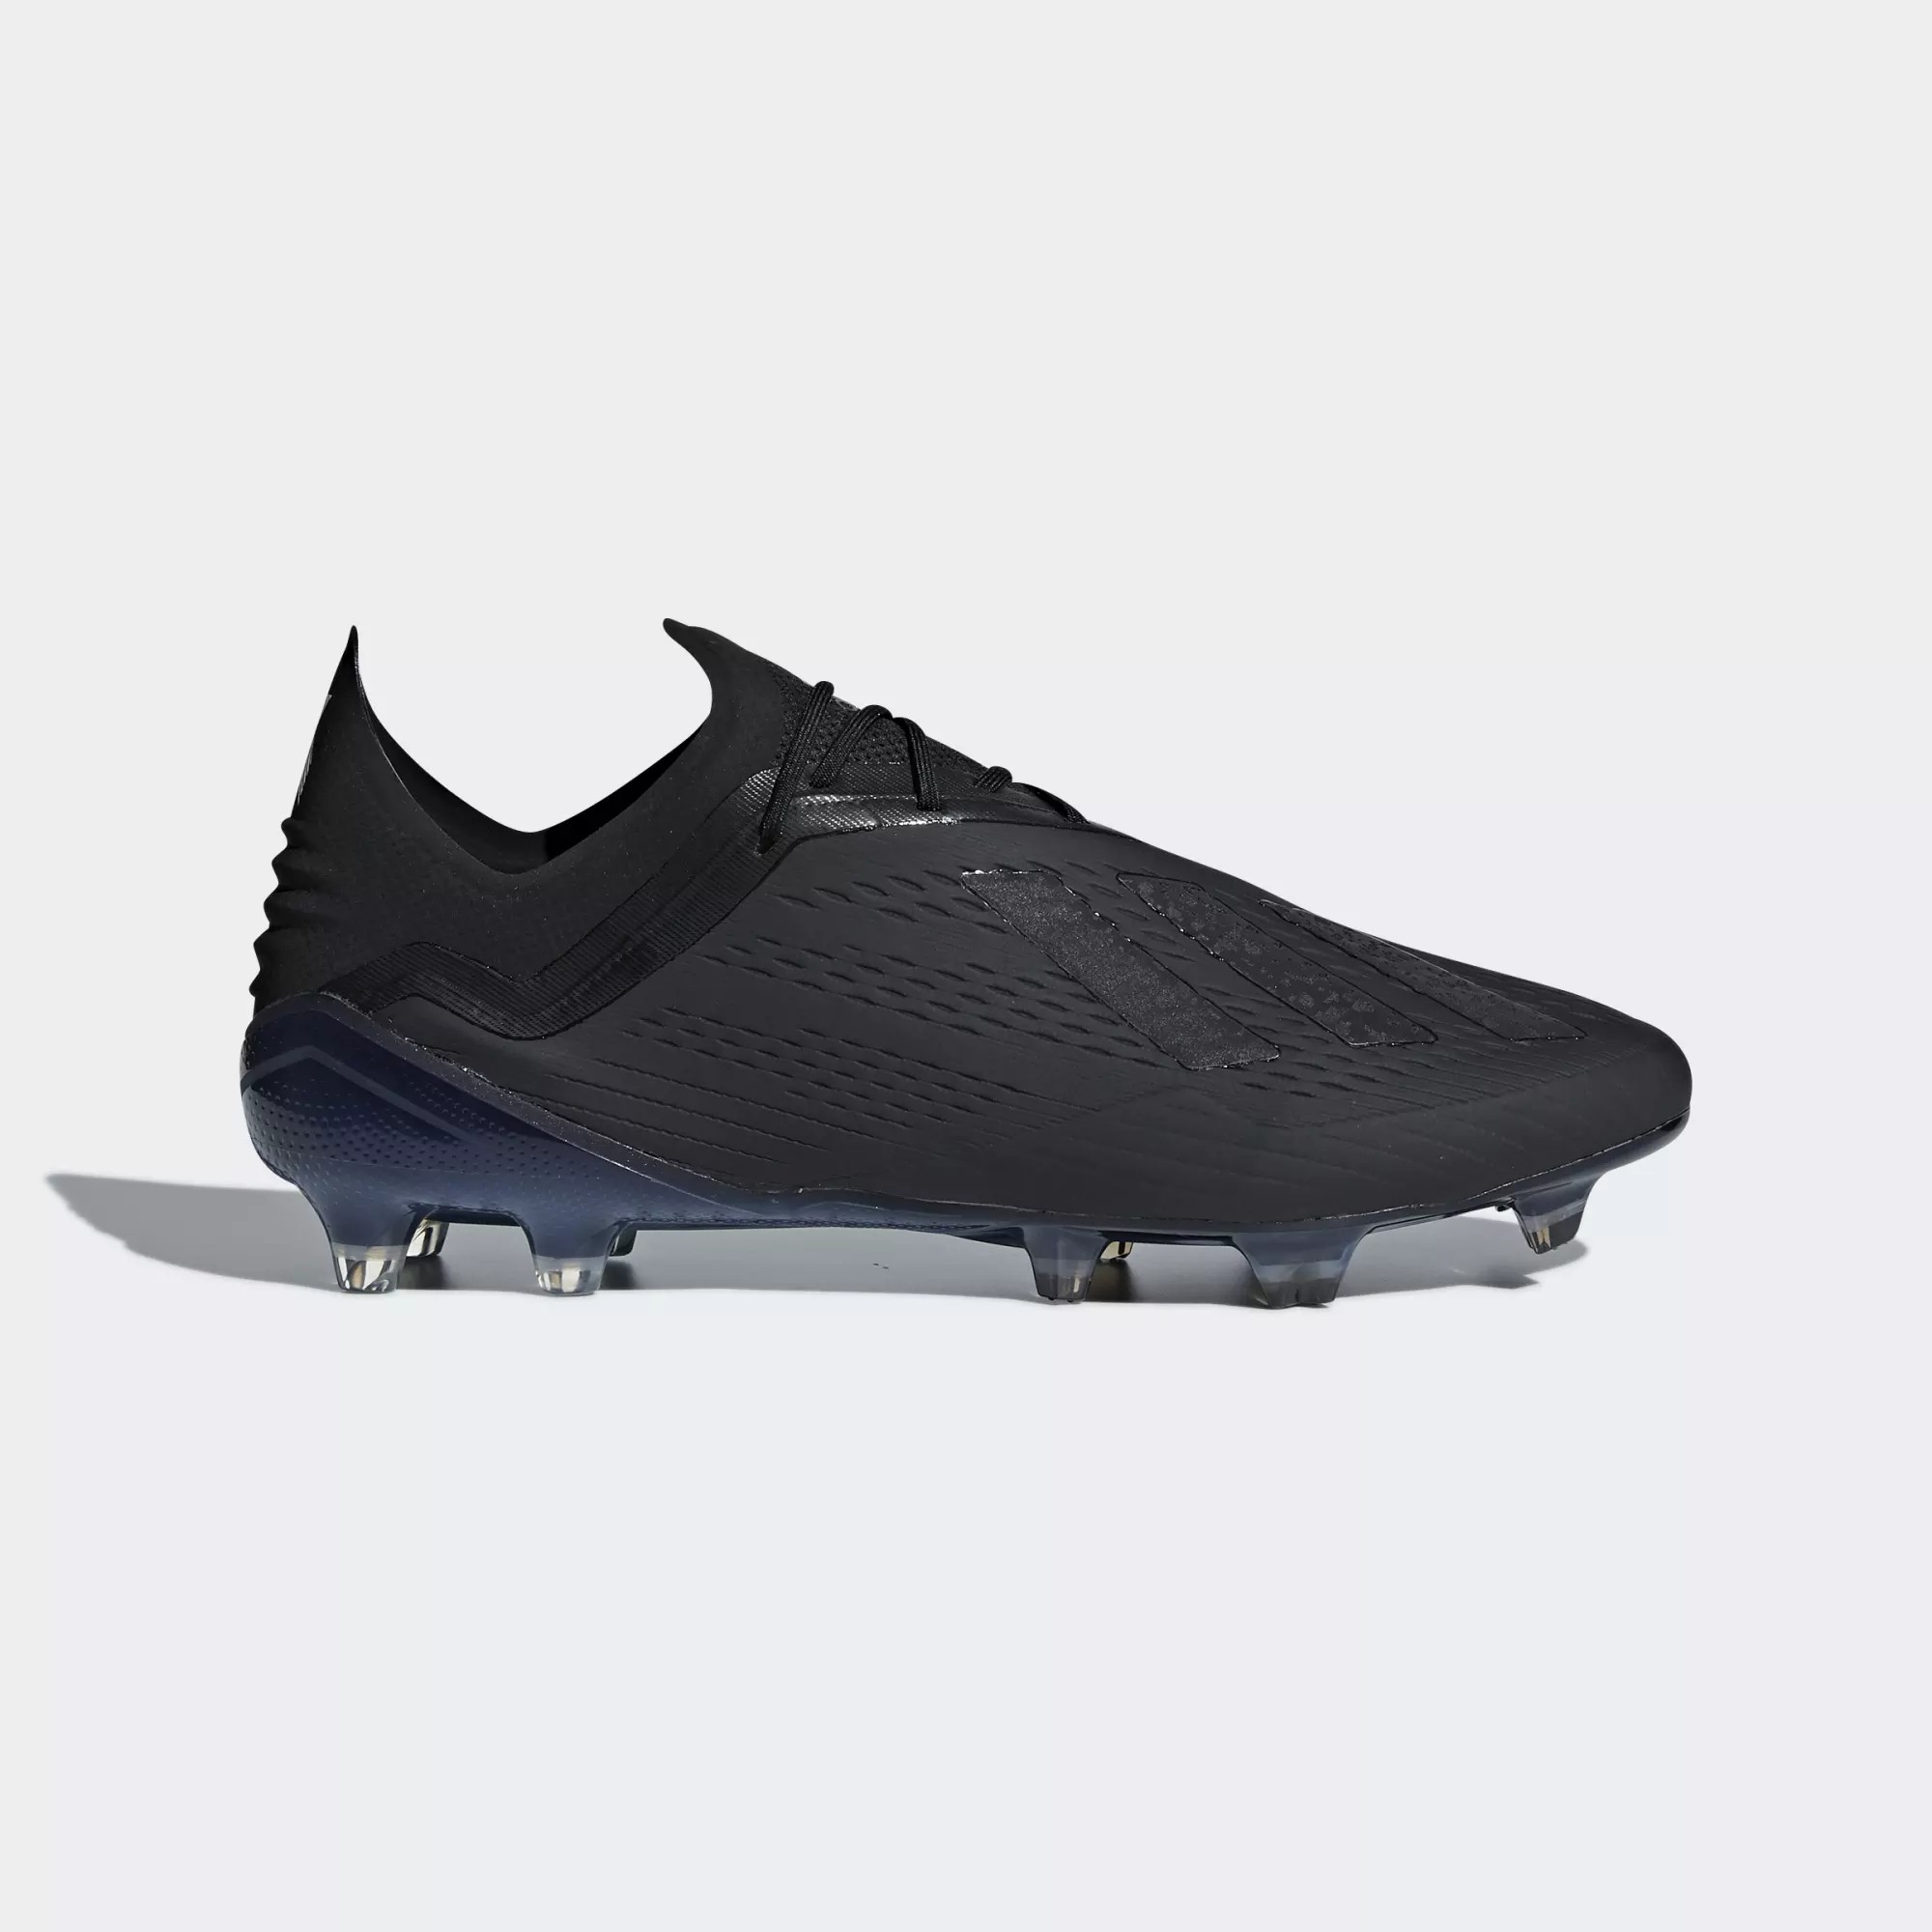 Bevidst Frank Worthley bark Adidas X 18.1 FG Shadow Mode - Core Black / Core Black / Ftwr White -  Football Shirt Culture - Latest Football Kit News and More